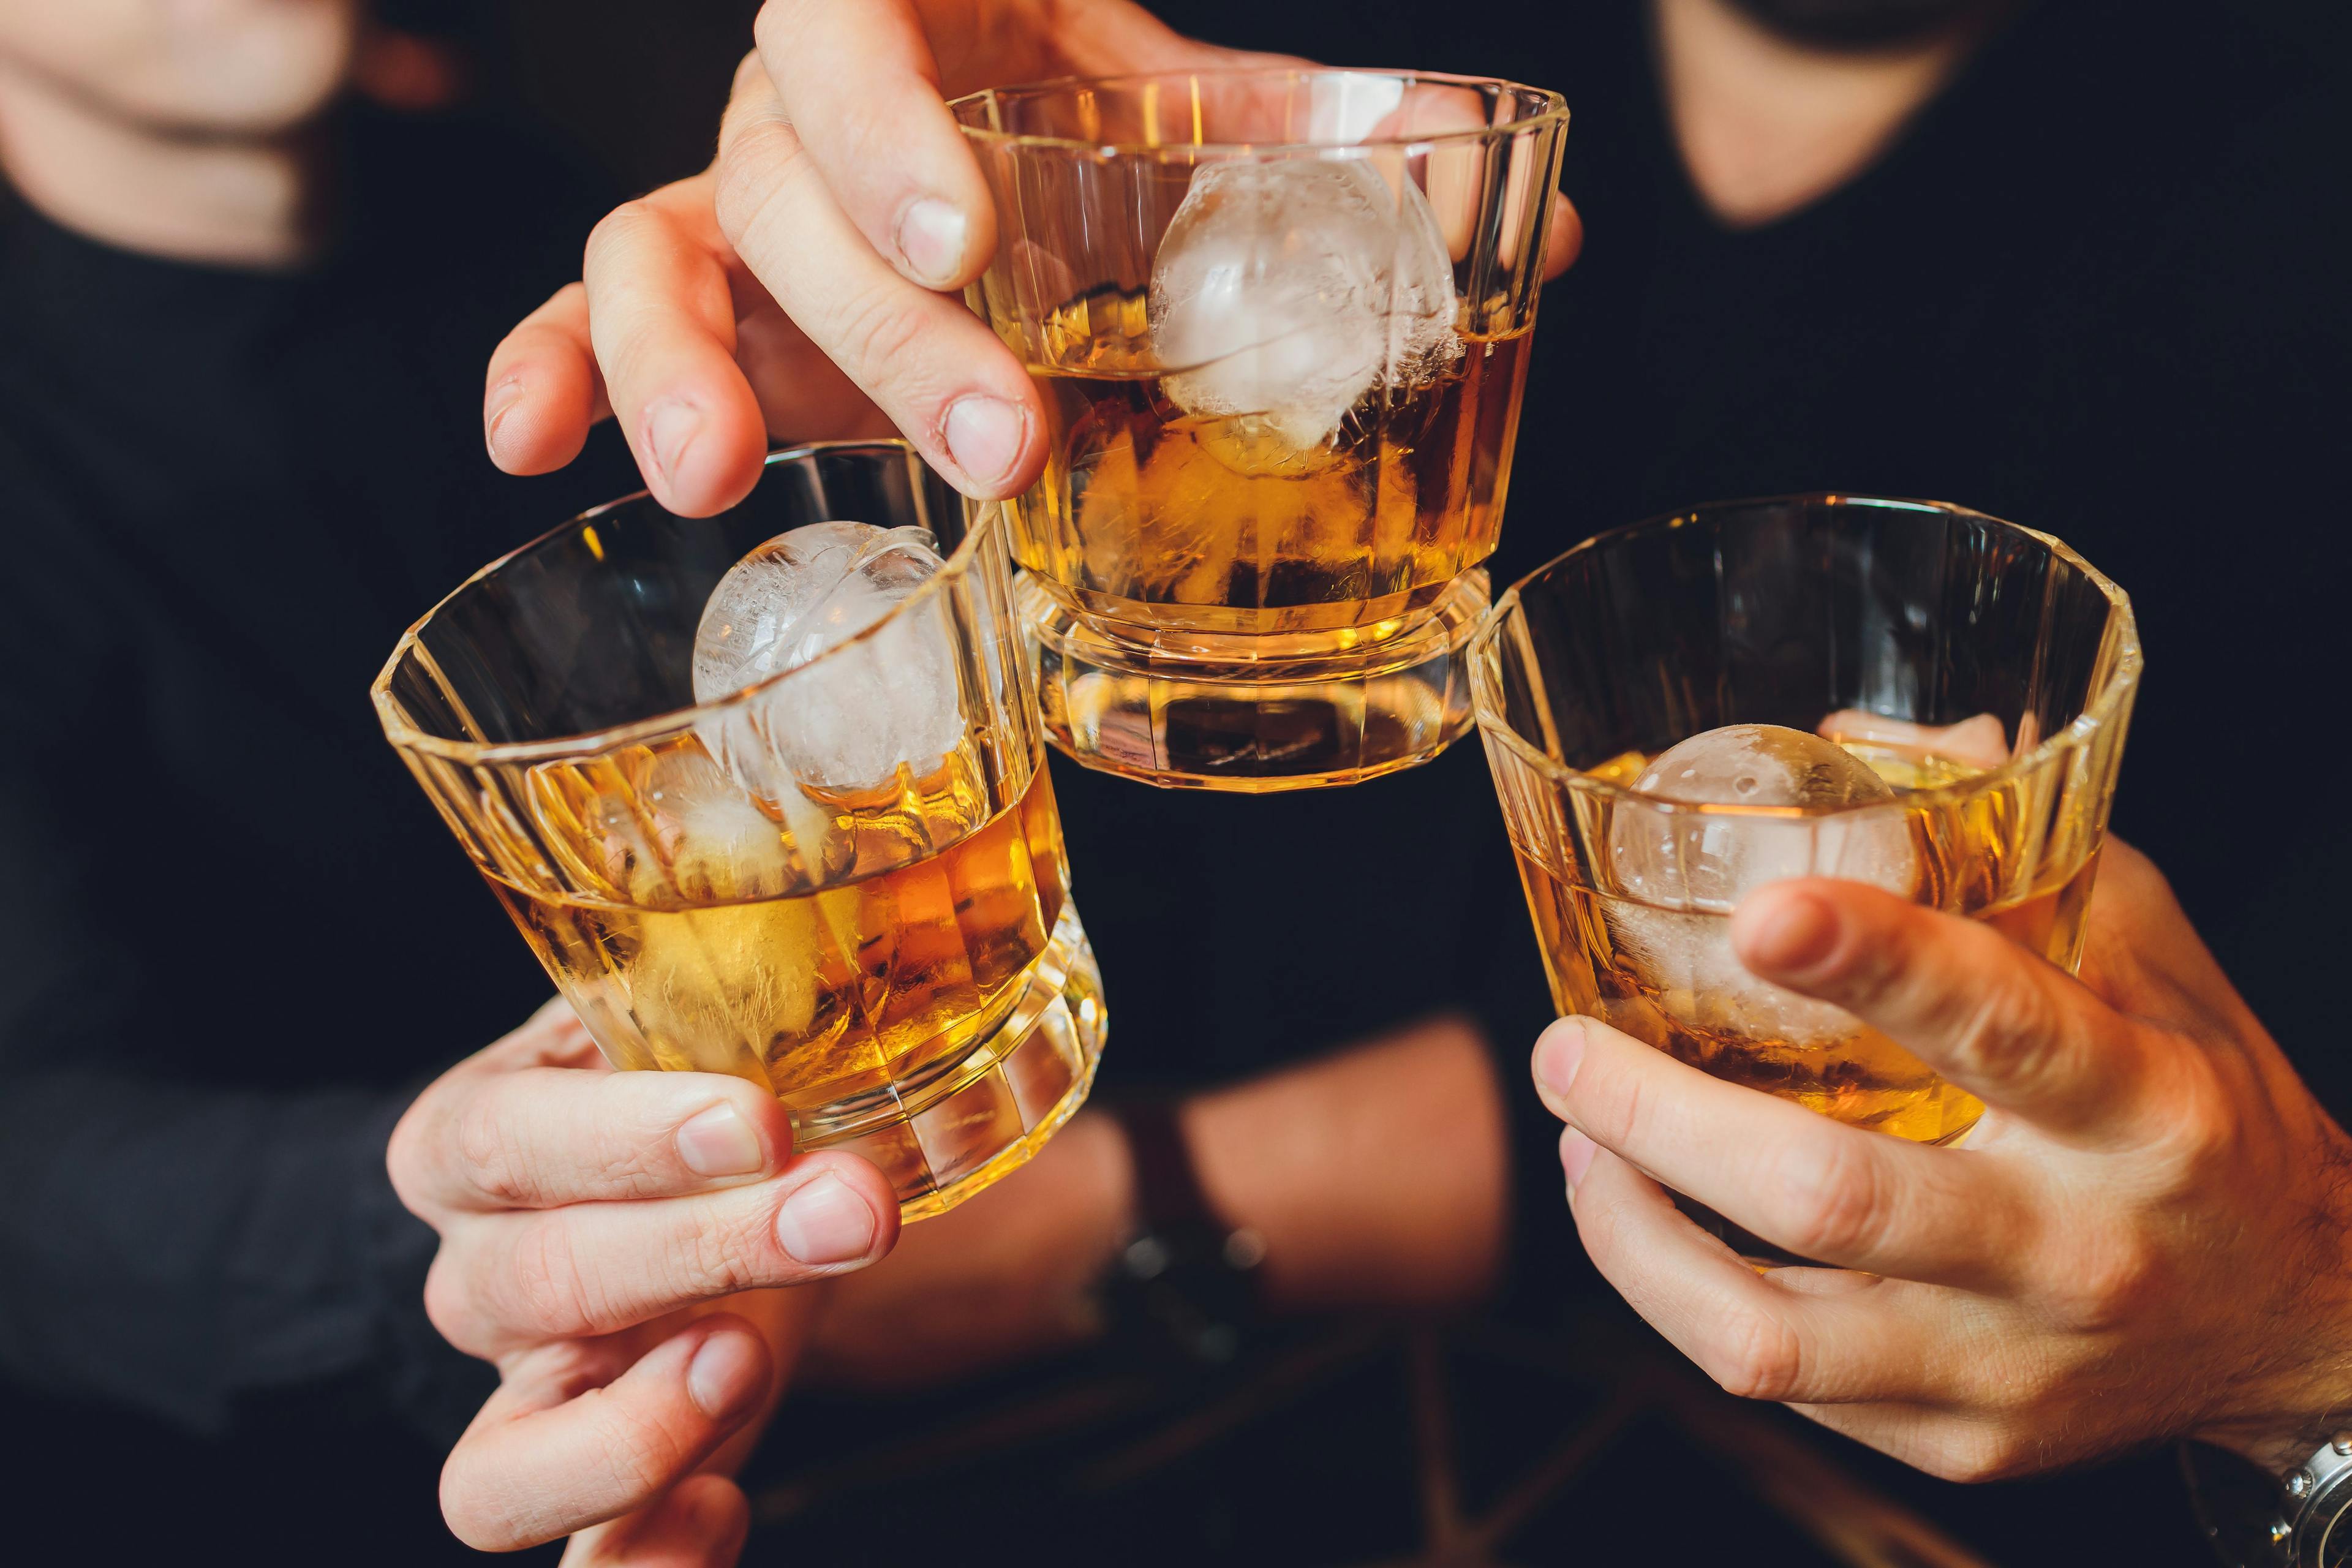 Gender, Not Alcohol Consumption, is Linked to Remission in Patients With Inflammatory Arthritis